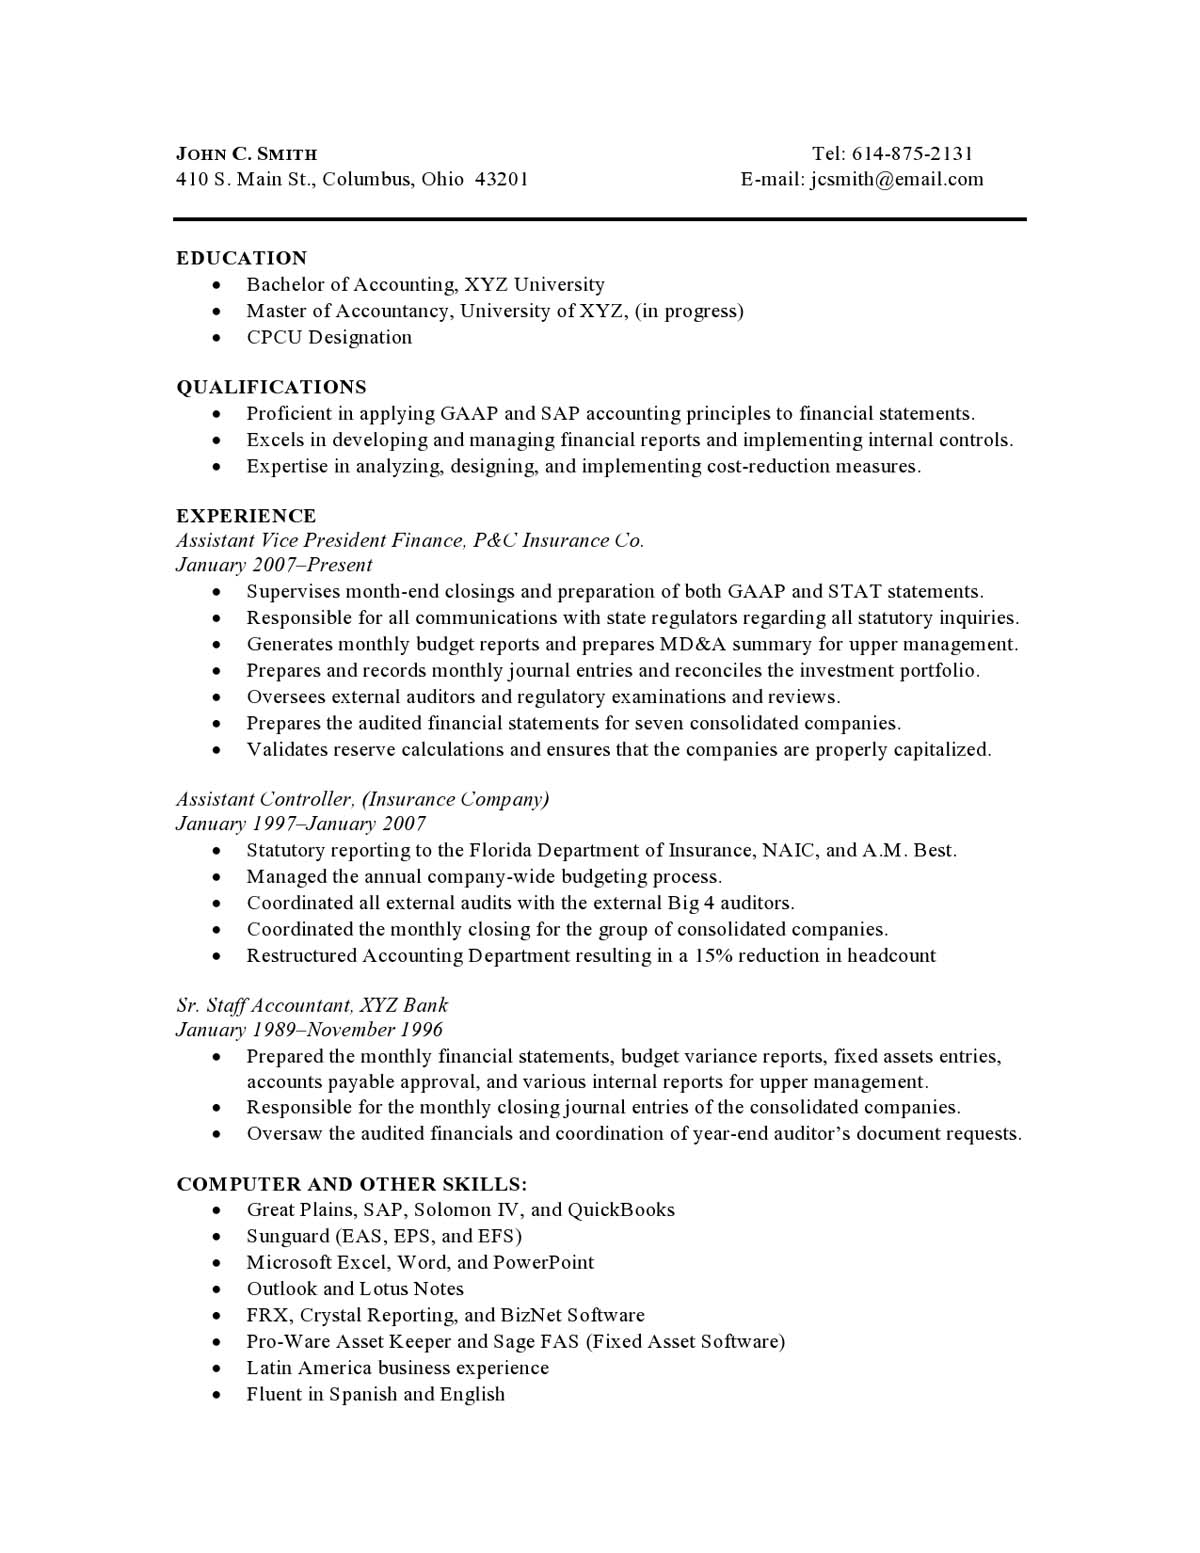 Example Of A Resume Crescoins20 example of a resume|wikiresume.com